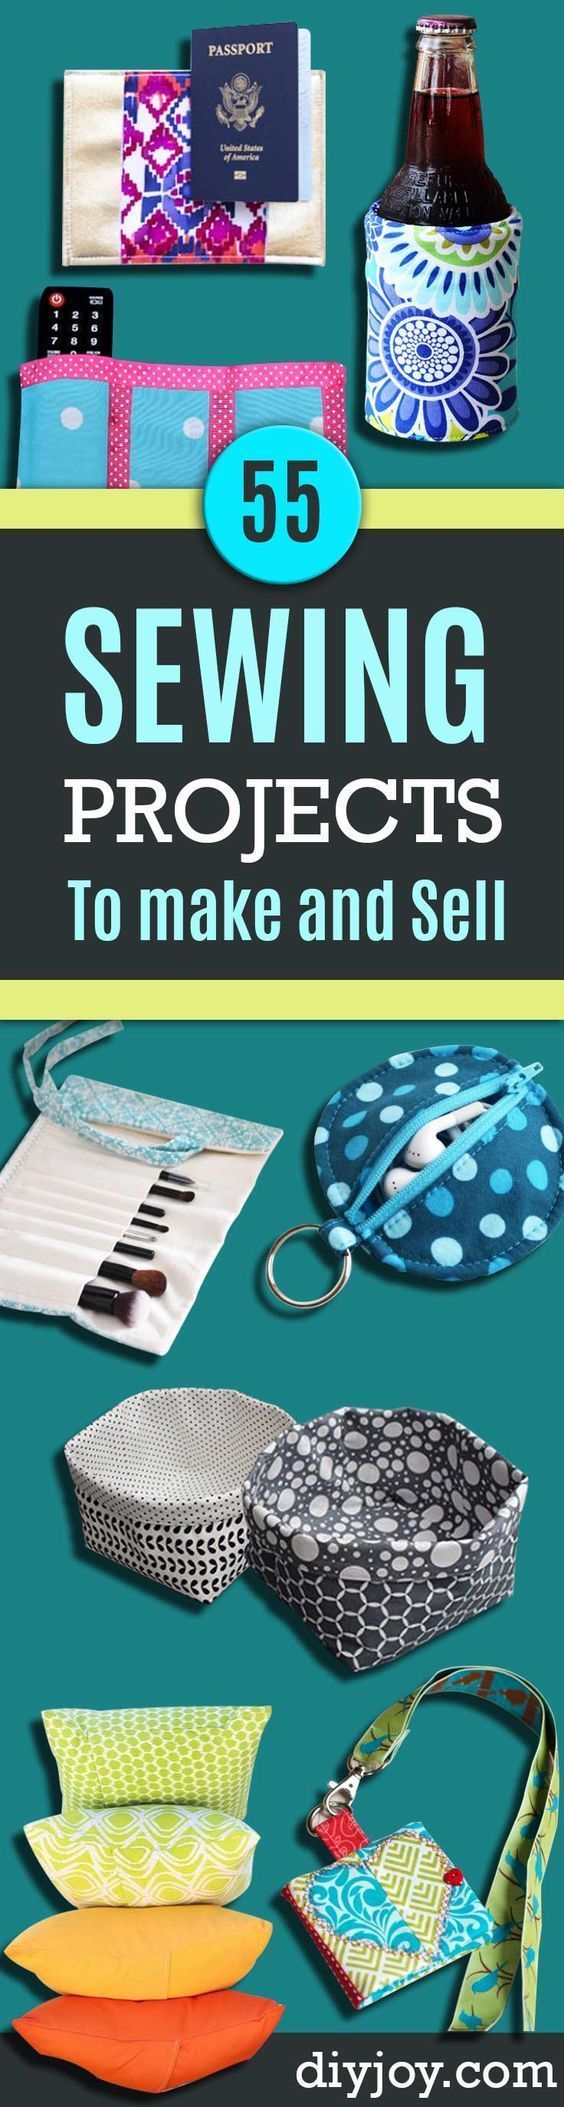 Easy Sewing Projects to Sell – DIY Sewing Ideas for Your Craft Business. Make Money with these Simple Gift Ideas, Free Patterns,